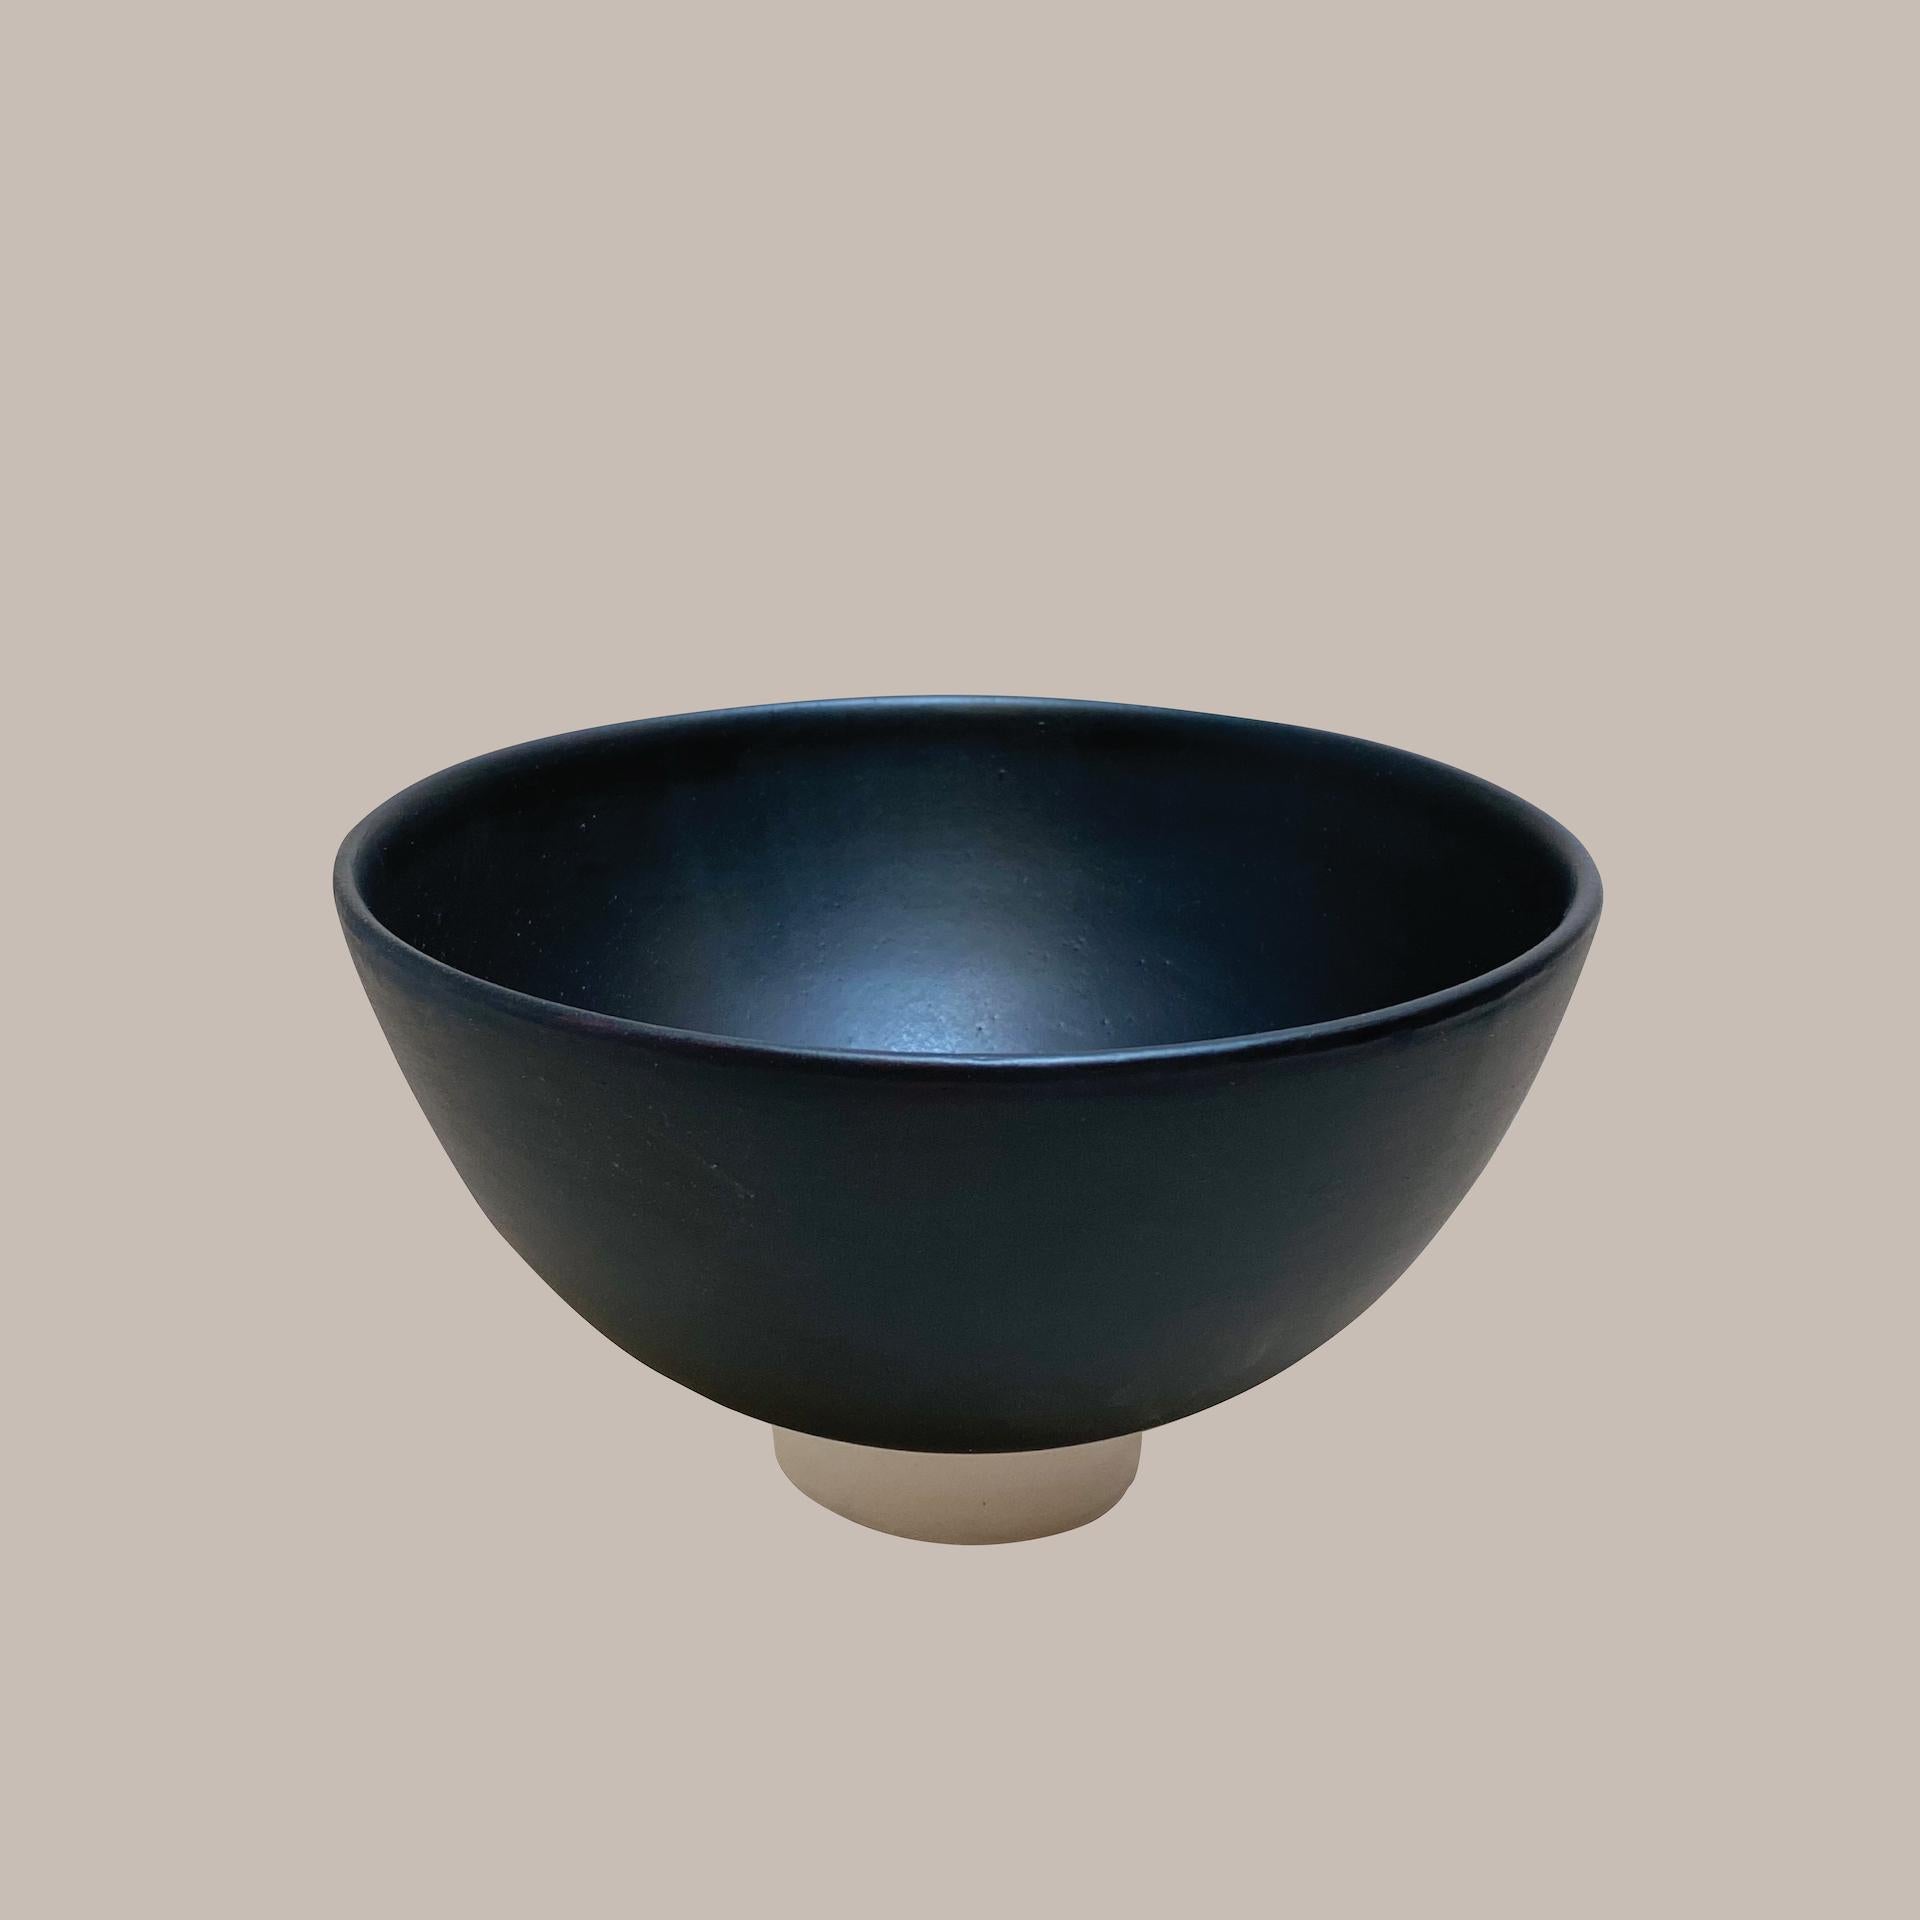 Ott Another Paradigmatic Handmade Ceramic Cup by Studio Yoon Seok-Hyeon In New Condition For Sale In Geneve, CH